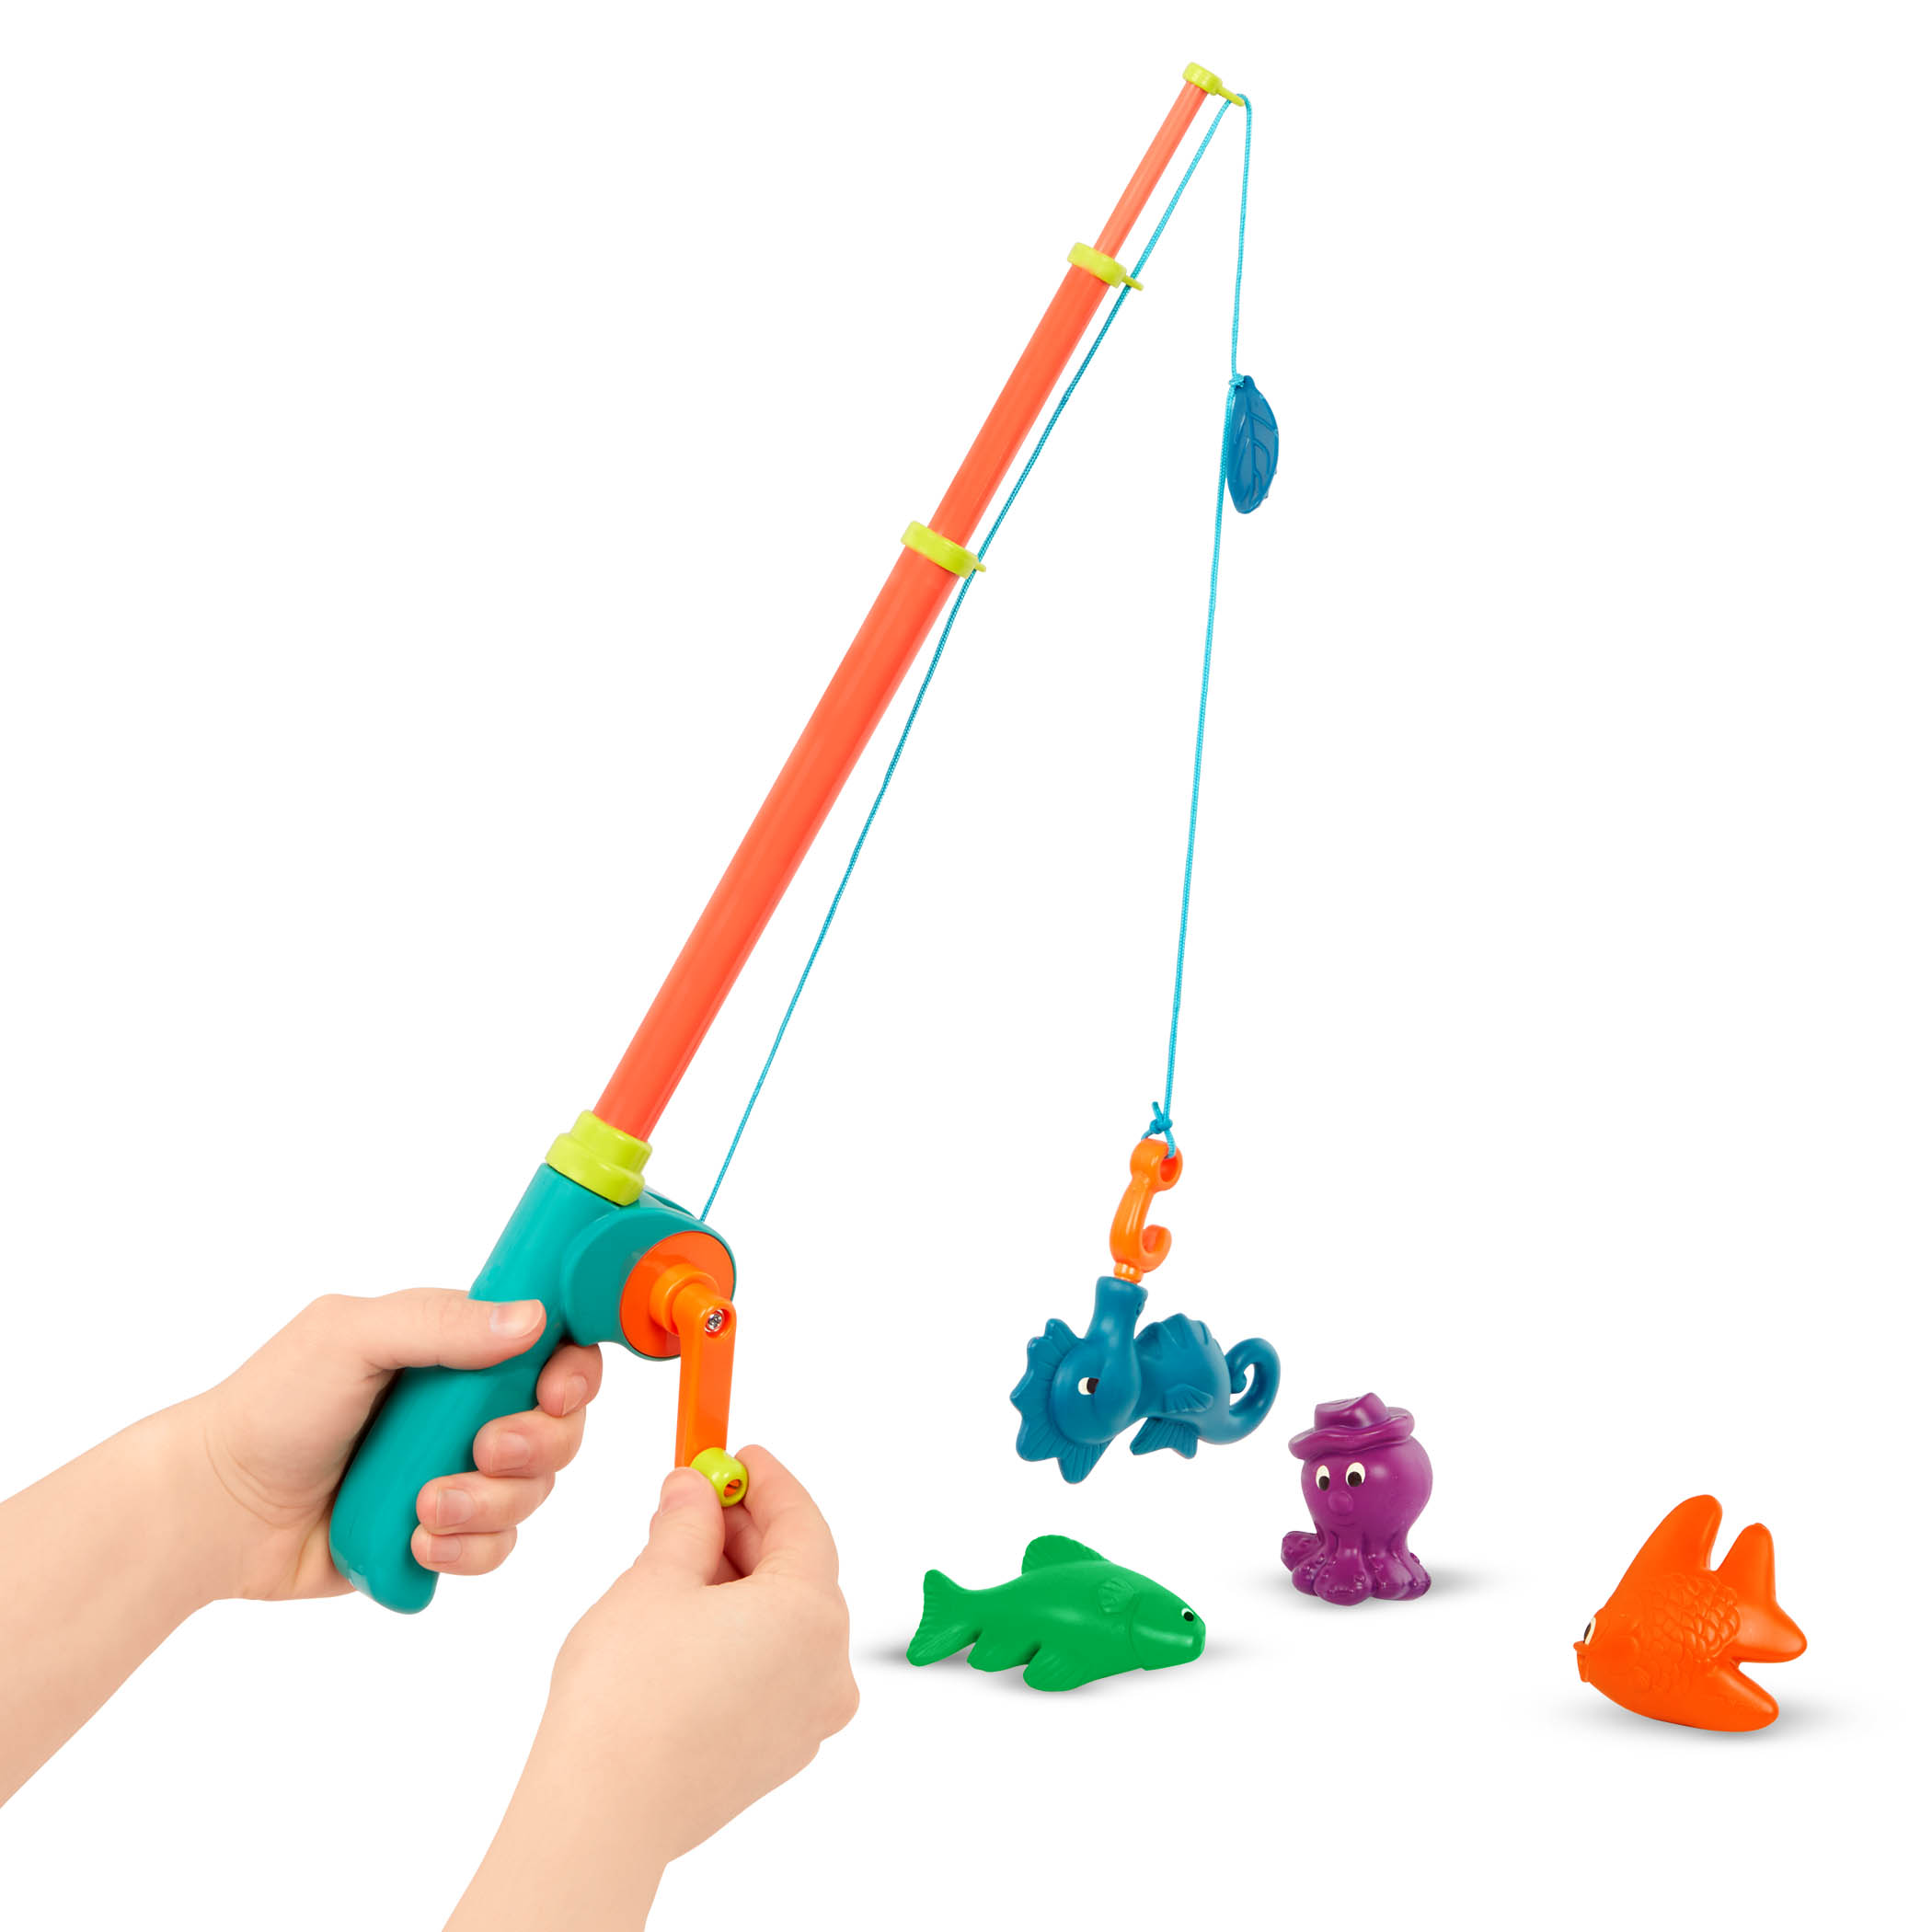 Fishing Game Series Toy for Kids with 1 Fishing Rod & 4 Colorful